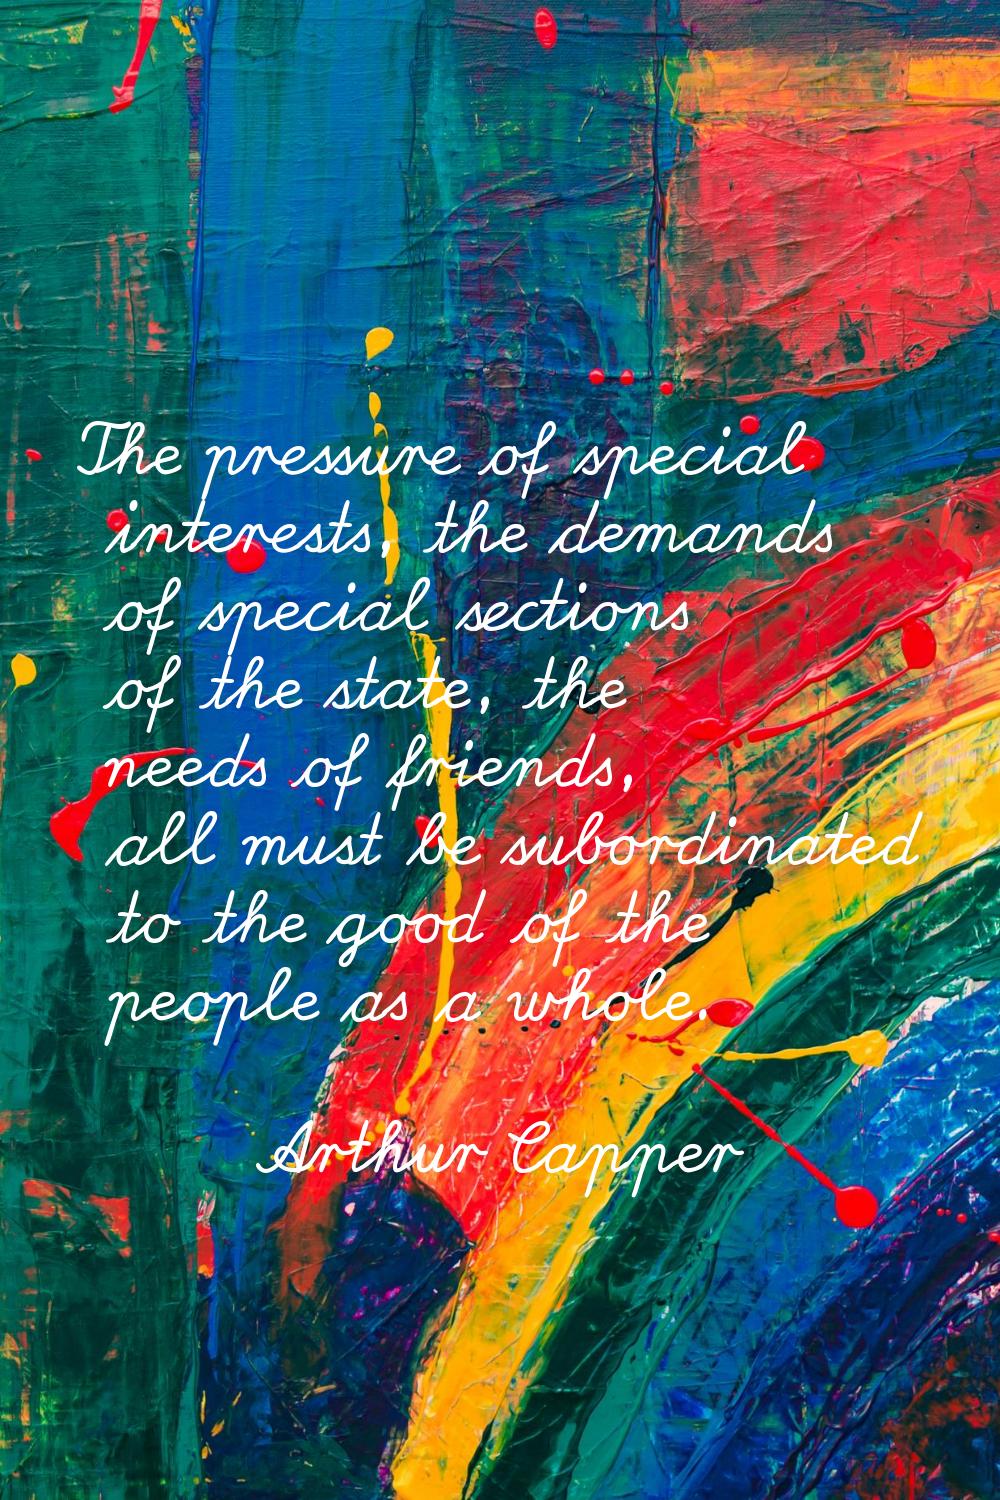 The pressure of special interests, the demands of special sections of the state, the needs of frien